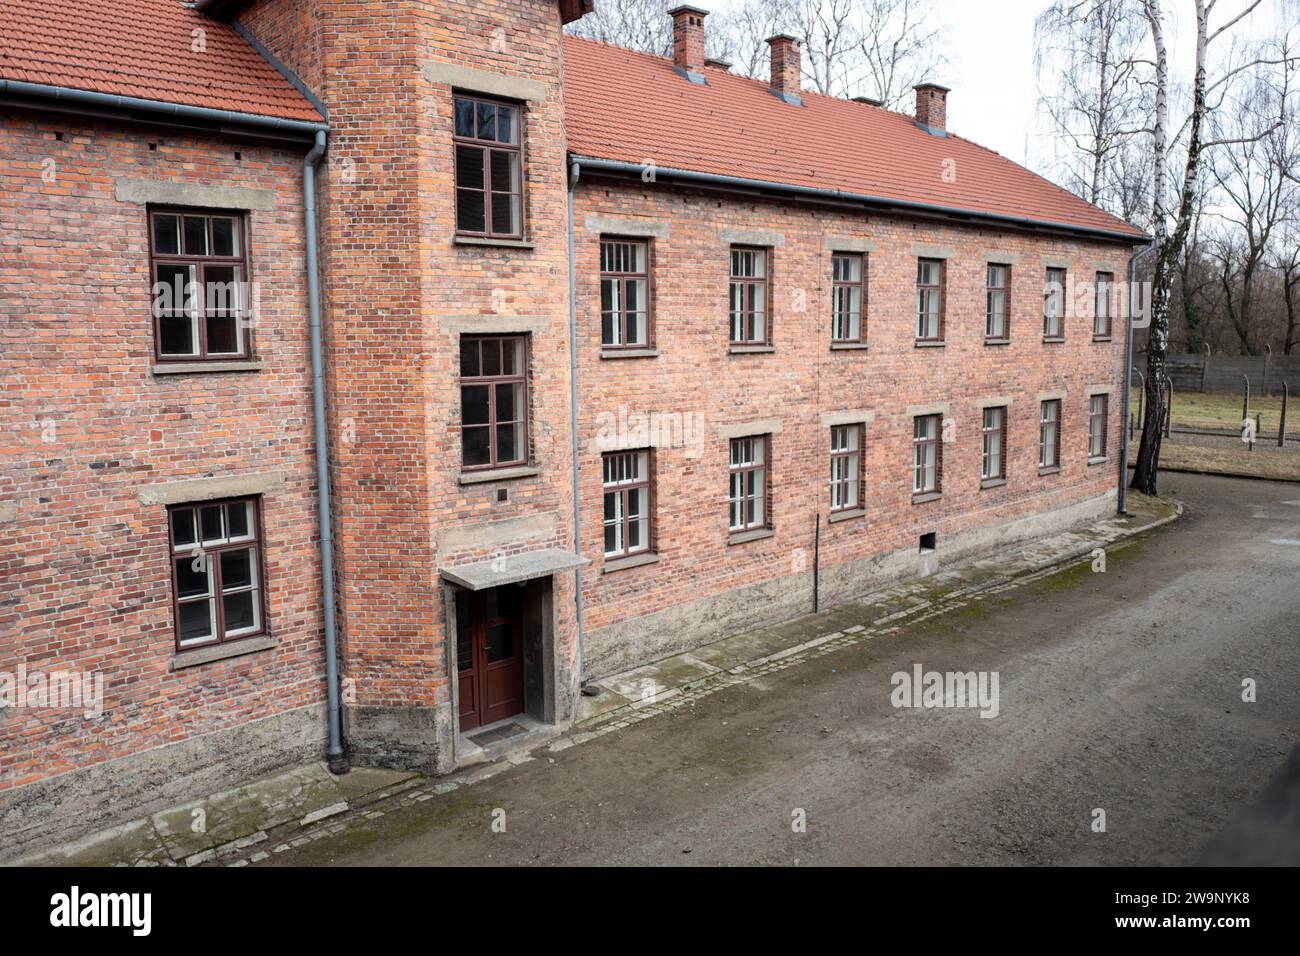 Accommodation and cells at Auschwitz and Birkenau concentration camps, Poland Stock Photo